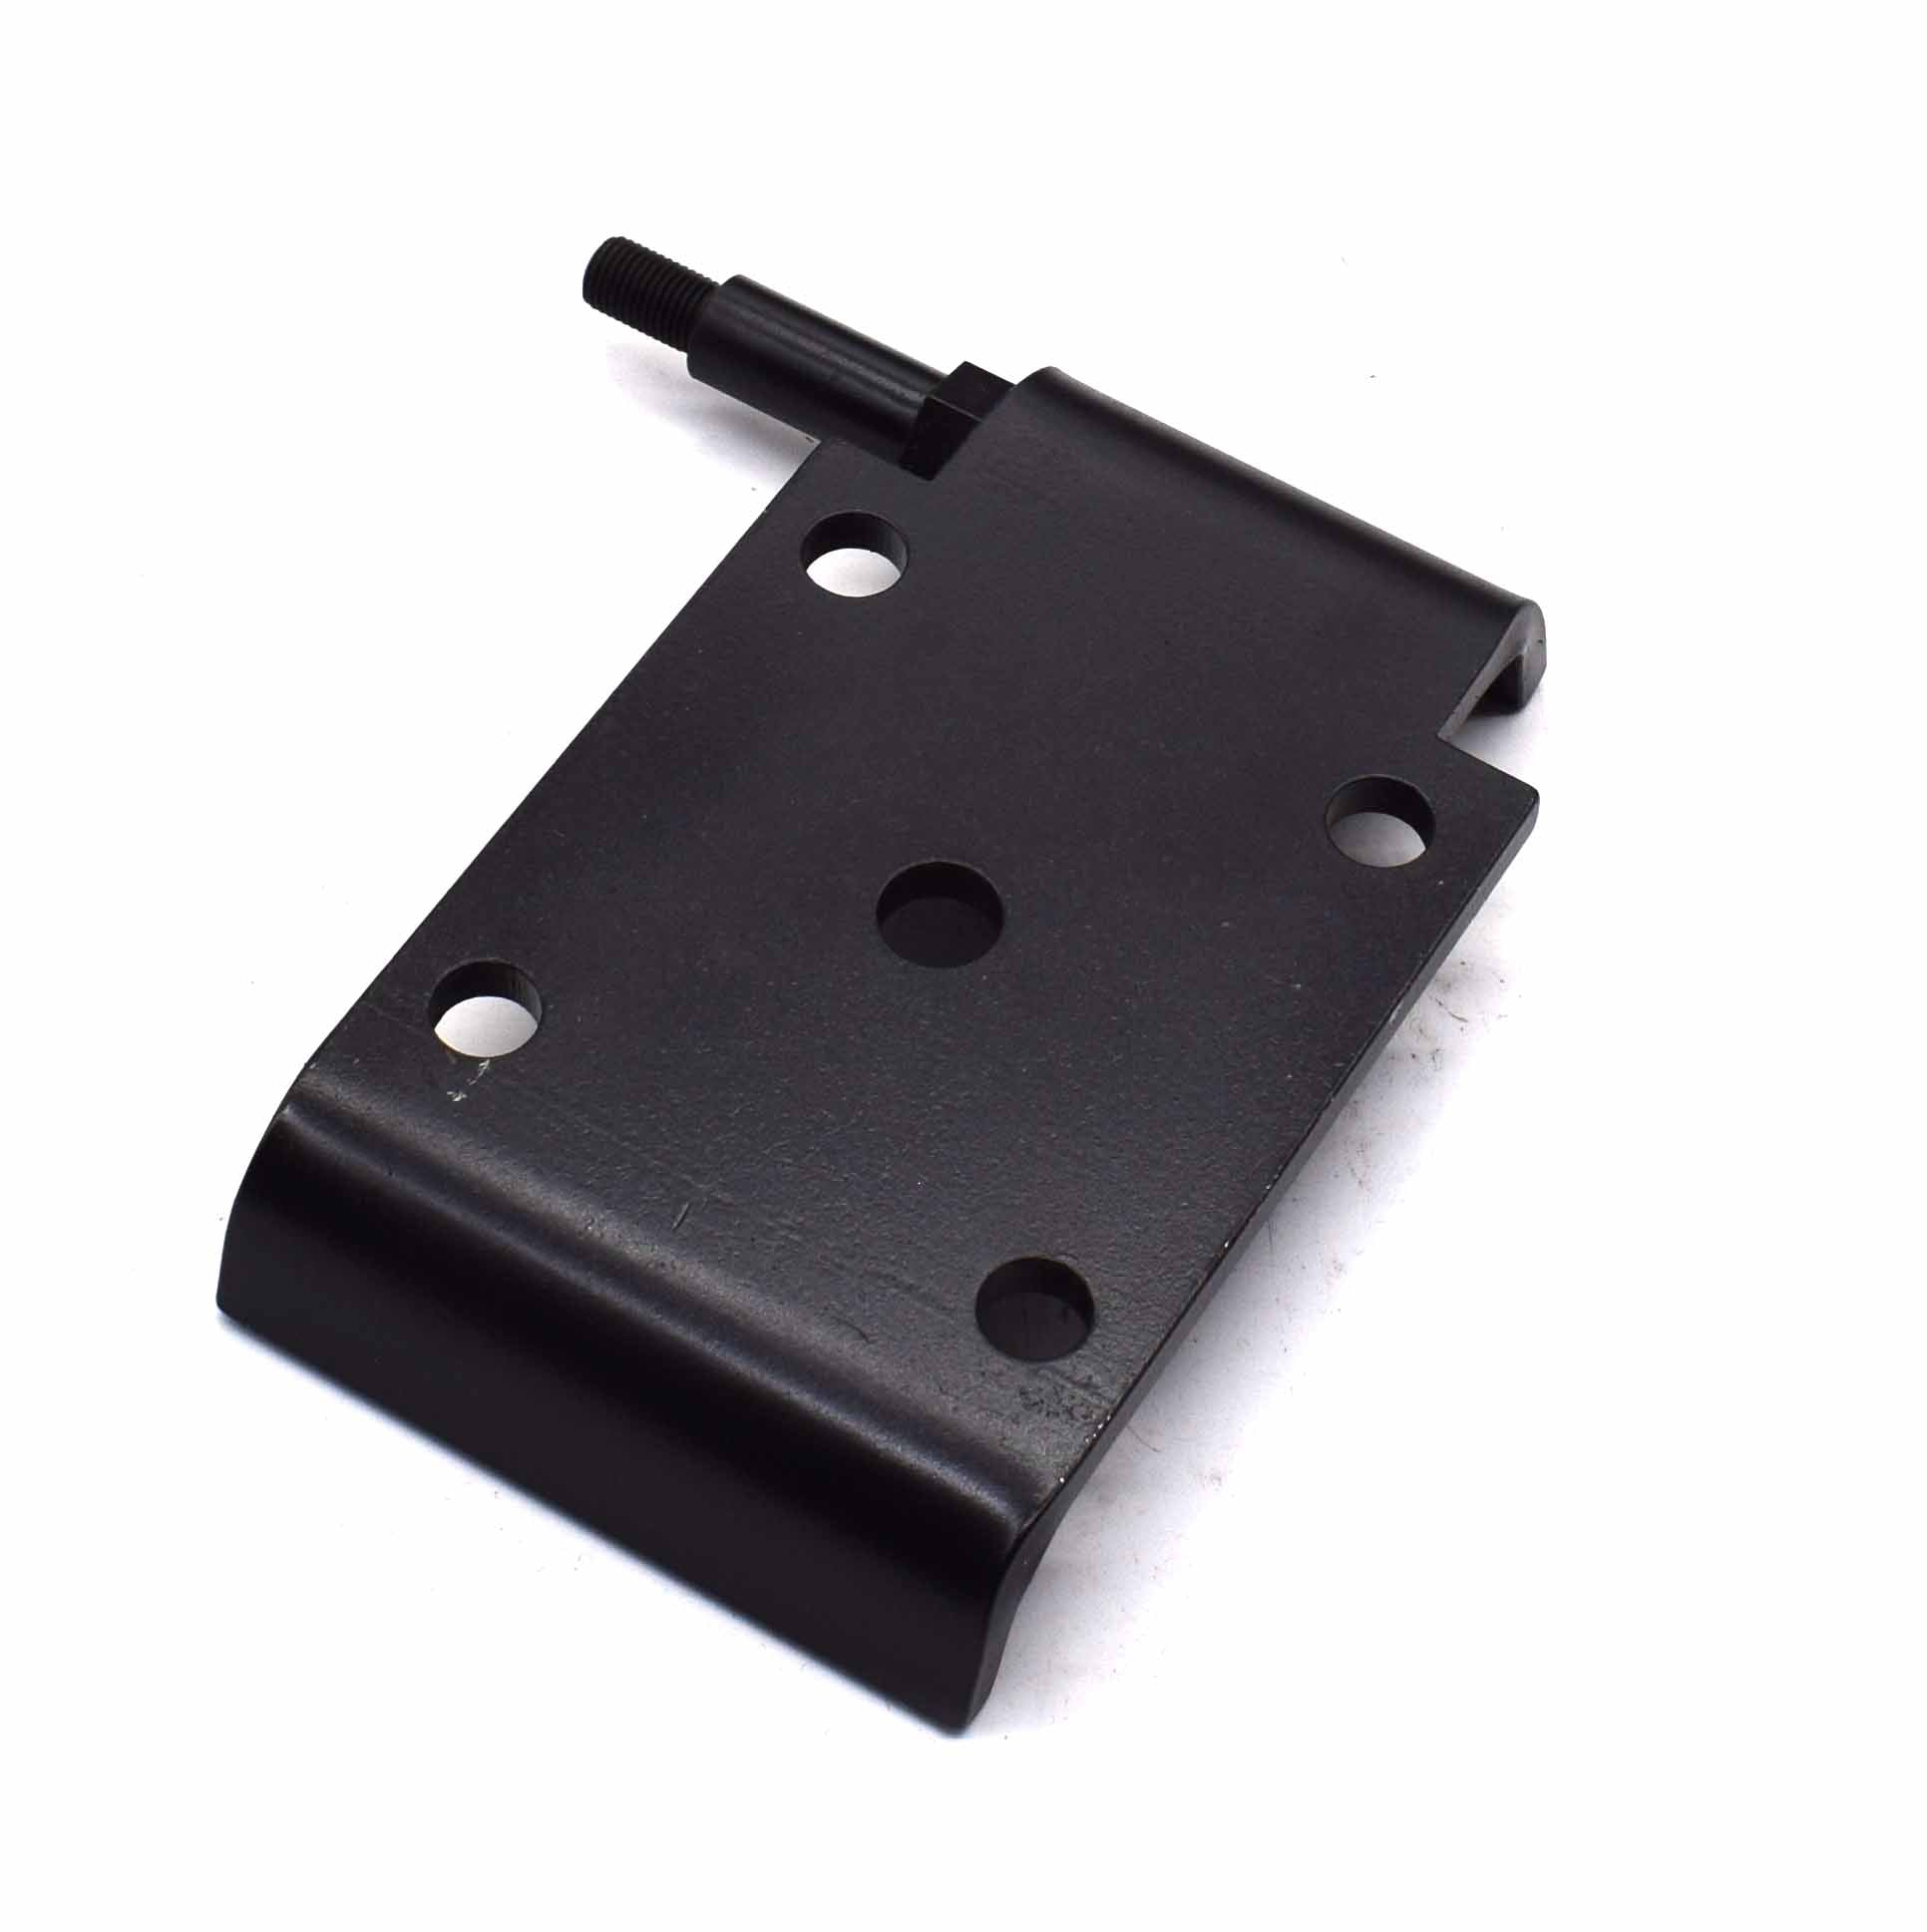 Leaf Spring Shock Mount Plate, Rear Driver Side, 1967-1973 Jeepster Commando and Jeep Commando - The JeepsterMan